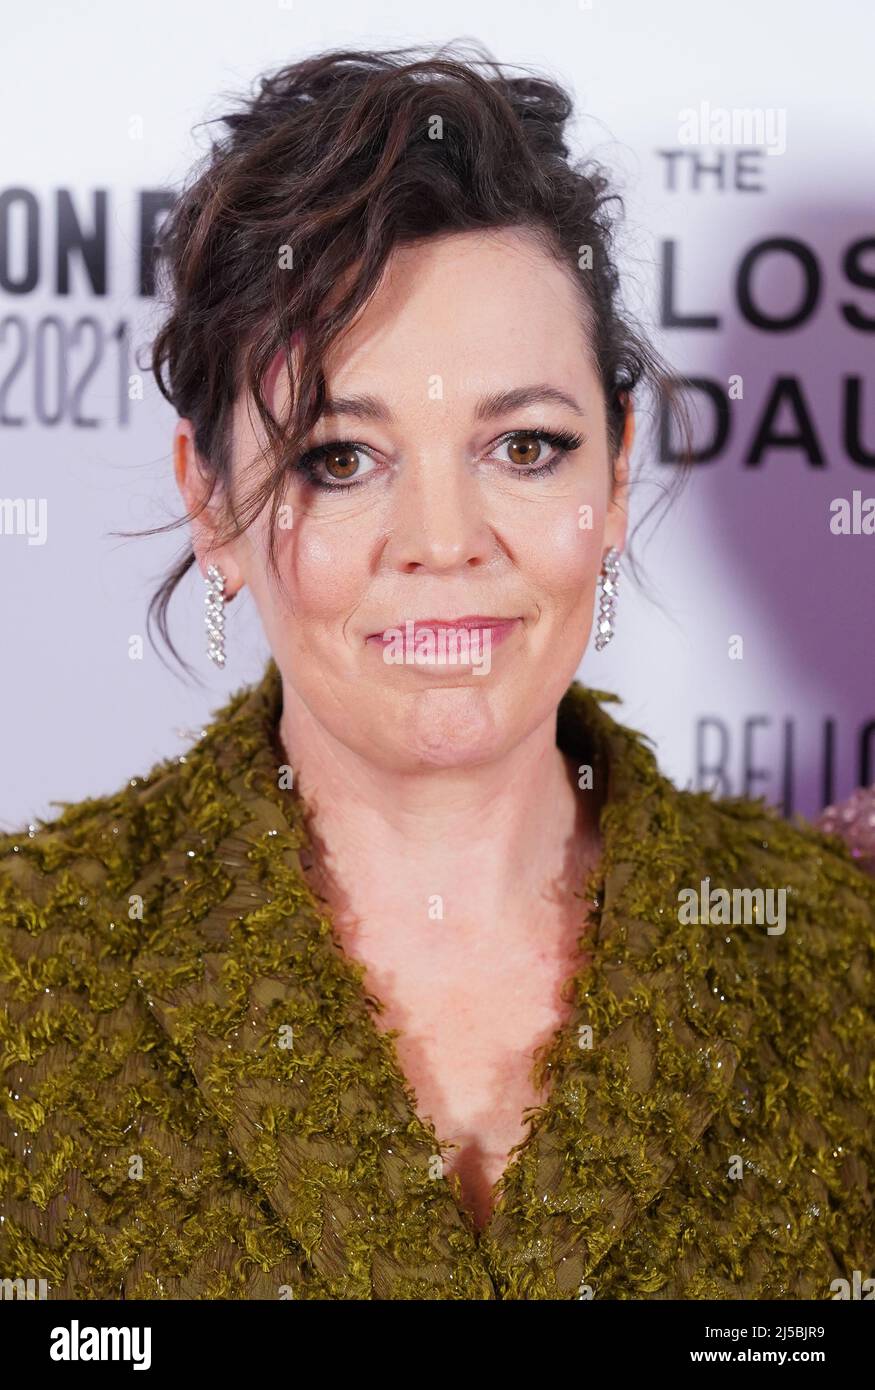 File photo dated 13/10/21 of Olivia Colman, who author and screenwriter Alice Oseman said she "couldn’t believe" agreed to appear in her Netflix series Heartstopper. The Oscar-winning actress, 48, appears as Nick's mum in the drama, which follows the lives of Charlie Spring and Nick Nelson after they meet at school and fall in love. Ms Oseman, 27, wrote the popular Heartstopper graphic novel series, which has sold one million print copies since its publication. Stock Photo